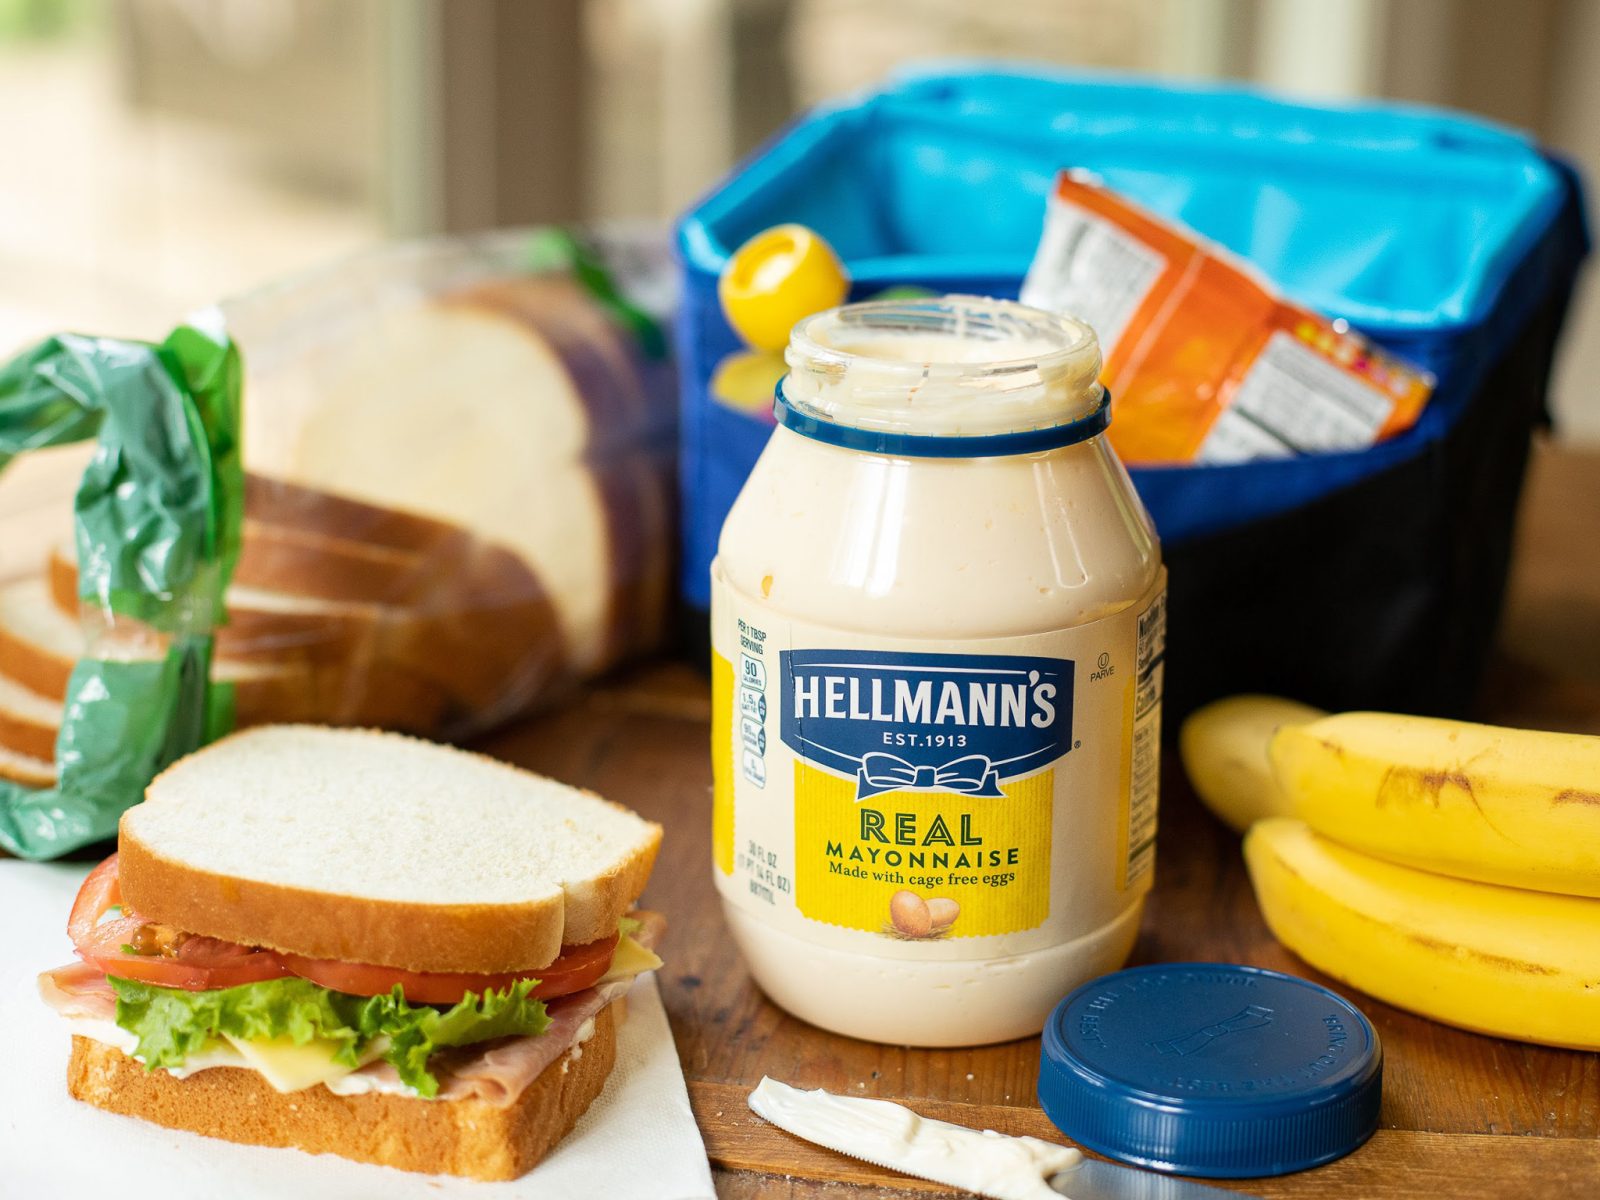 Don't Miss Your Chance To Get Big Savings On Hellmann's Mayonnaise - Save $2 Now At Publix on I Heart Publix 1